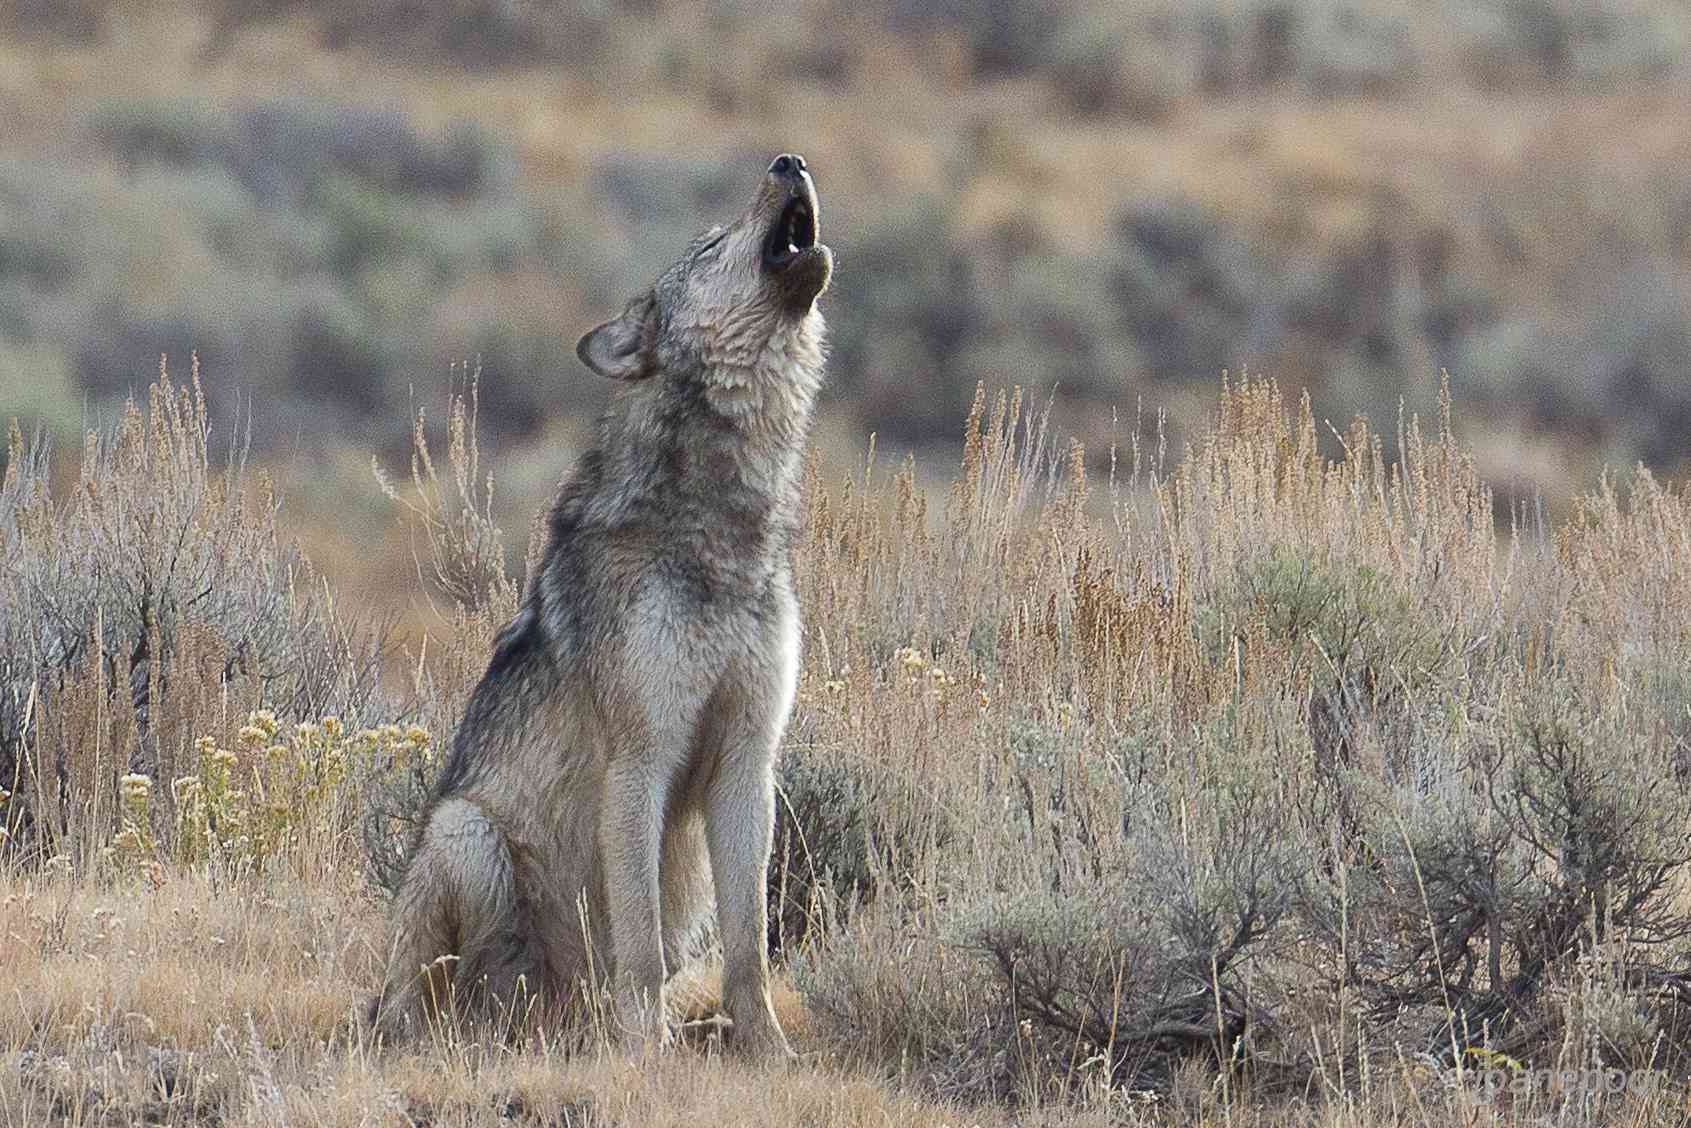 Adolescent gray wolf howling near Lamar River in Yellowstone